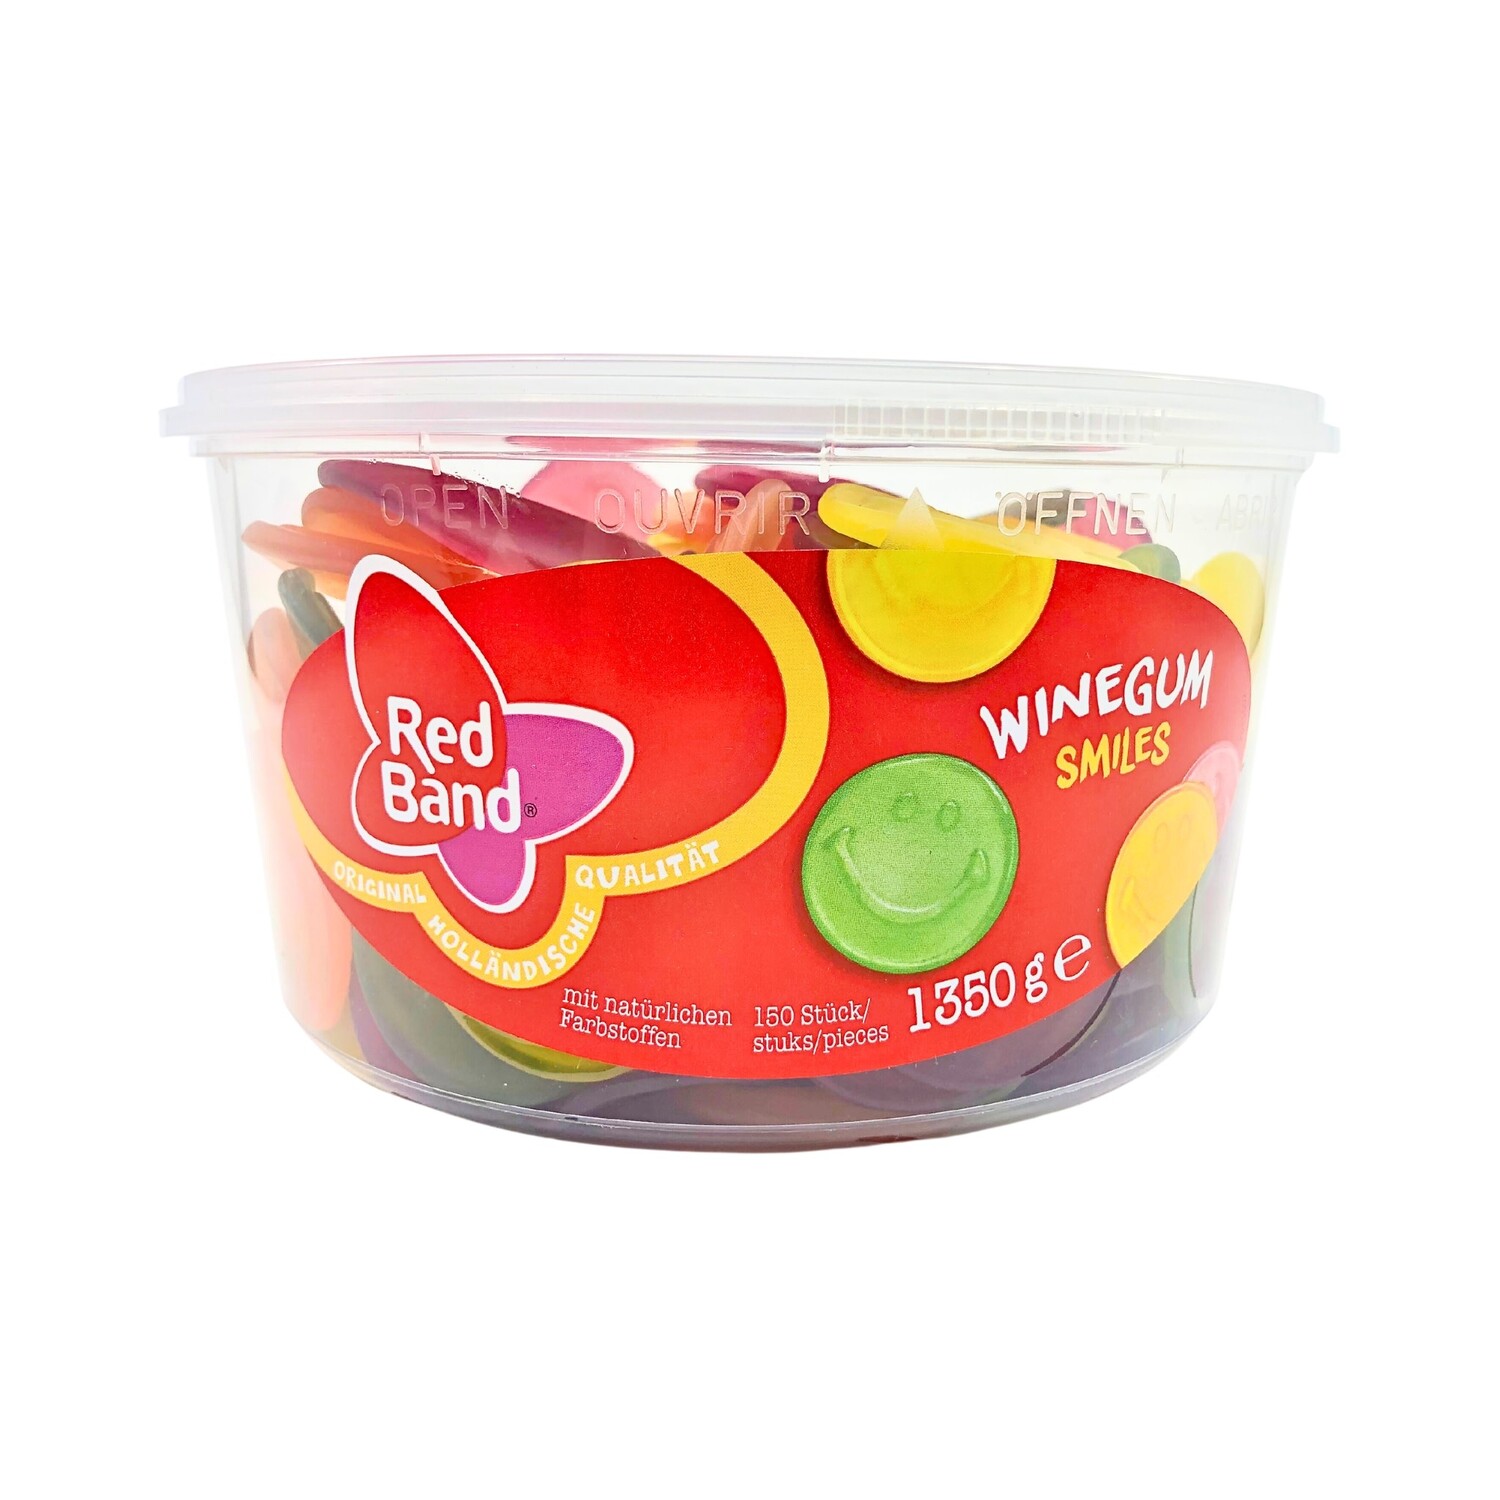 Red Band Red Band Winegum Smiles Tub 150 count